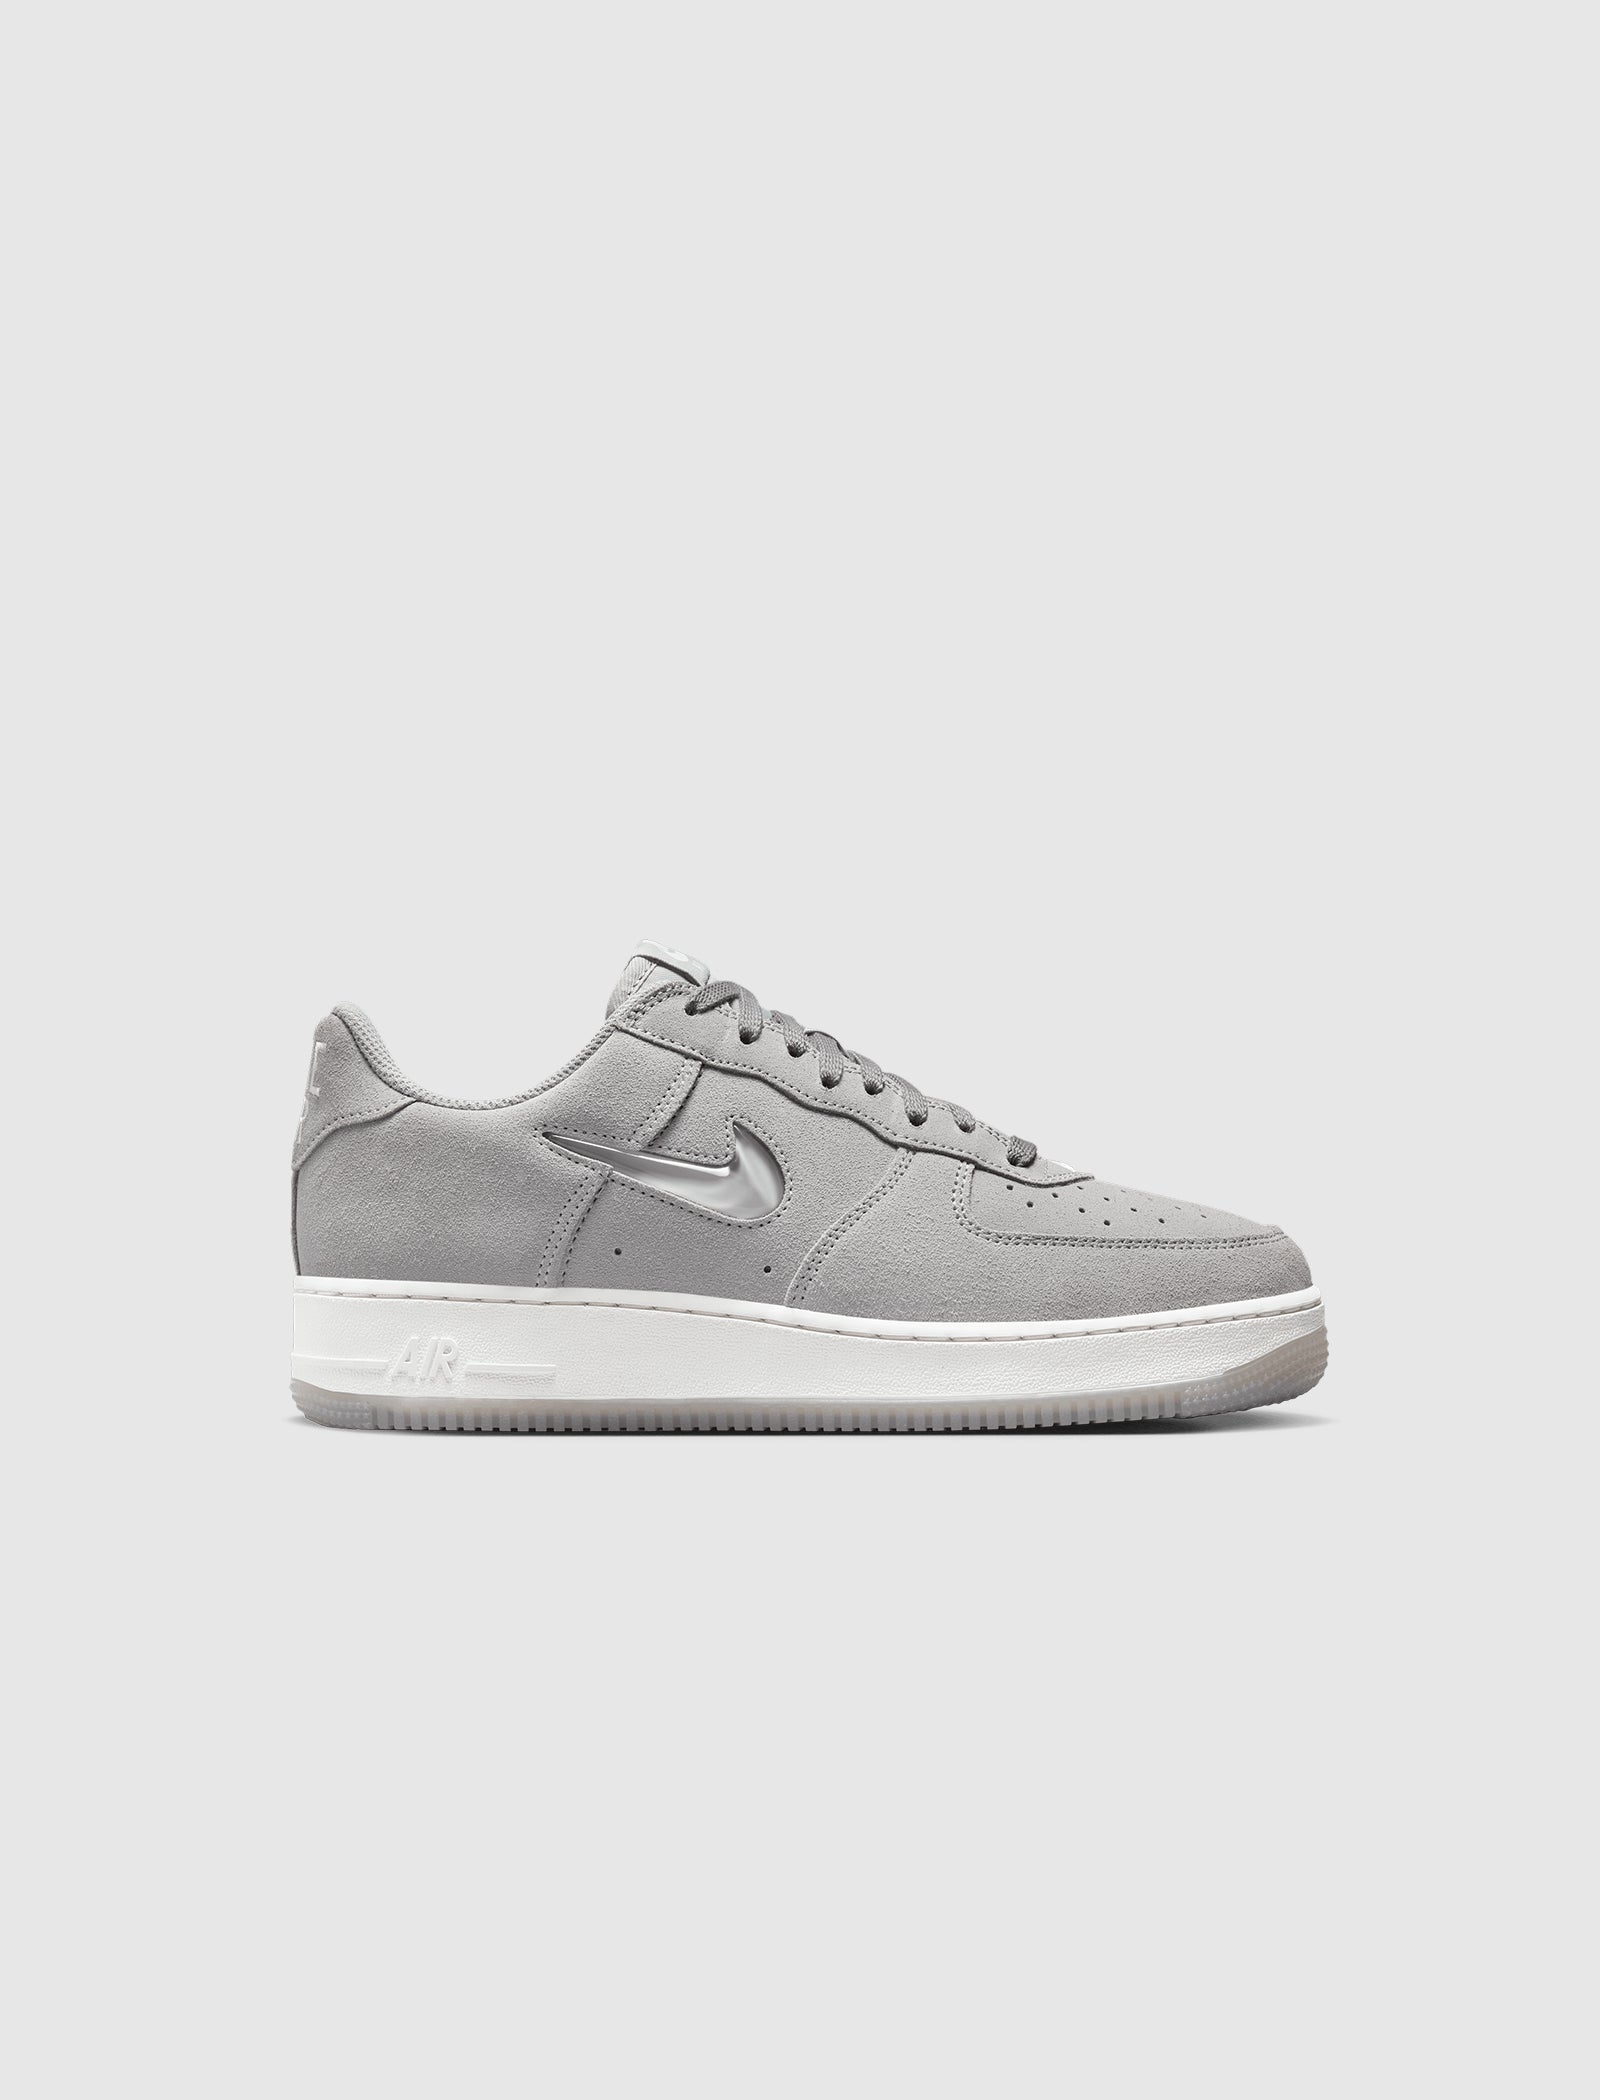 AIR FORCE 1 LOW RETRO COLOR OF THE MONTH "LIGHT SMOKE GREY"